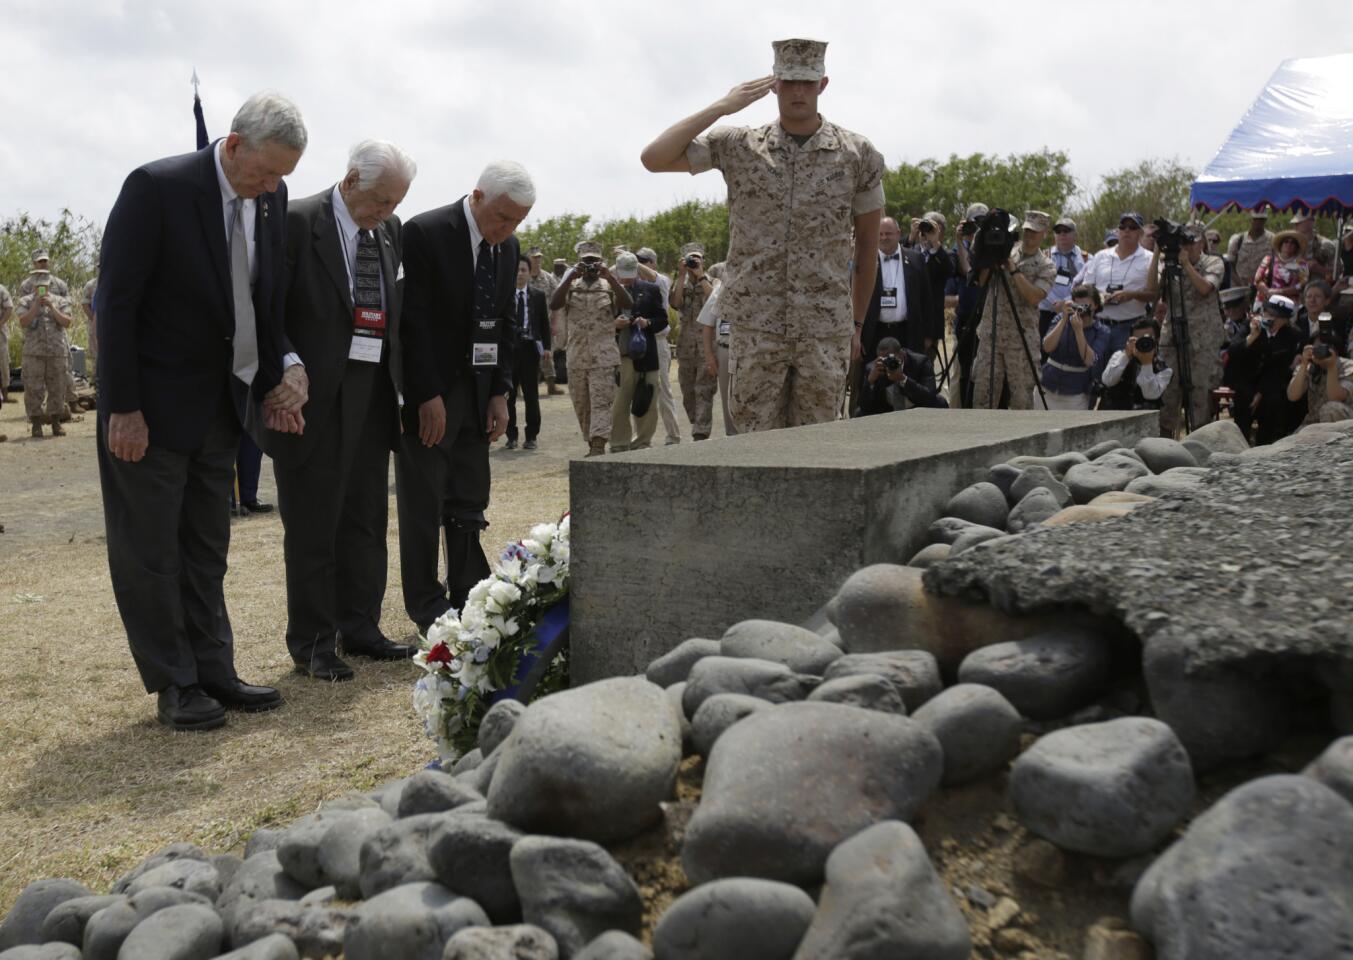 U.S. veterans pay respect at the Iwo Jima battle monument during a ceremony marking the 70th anniversary of the battle.